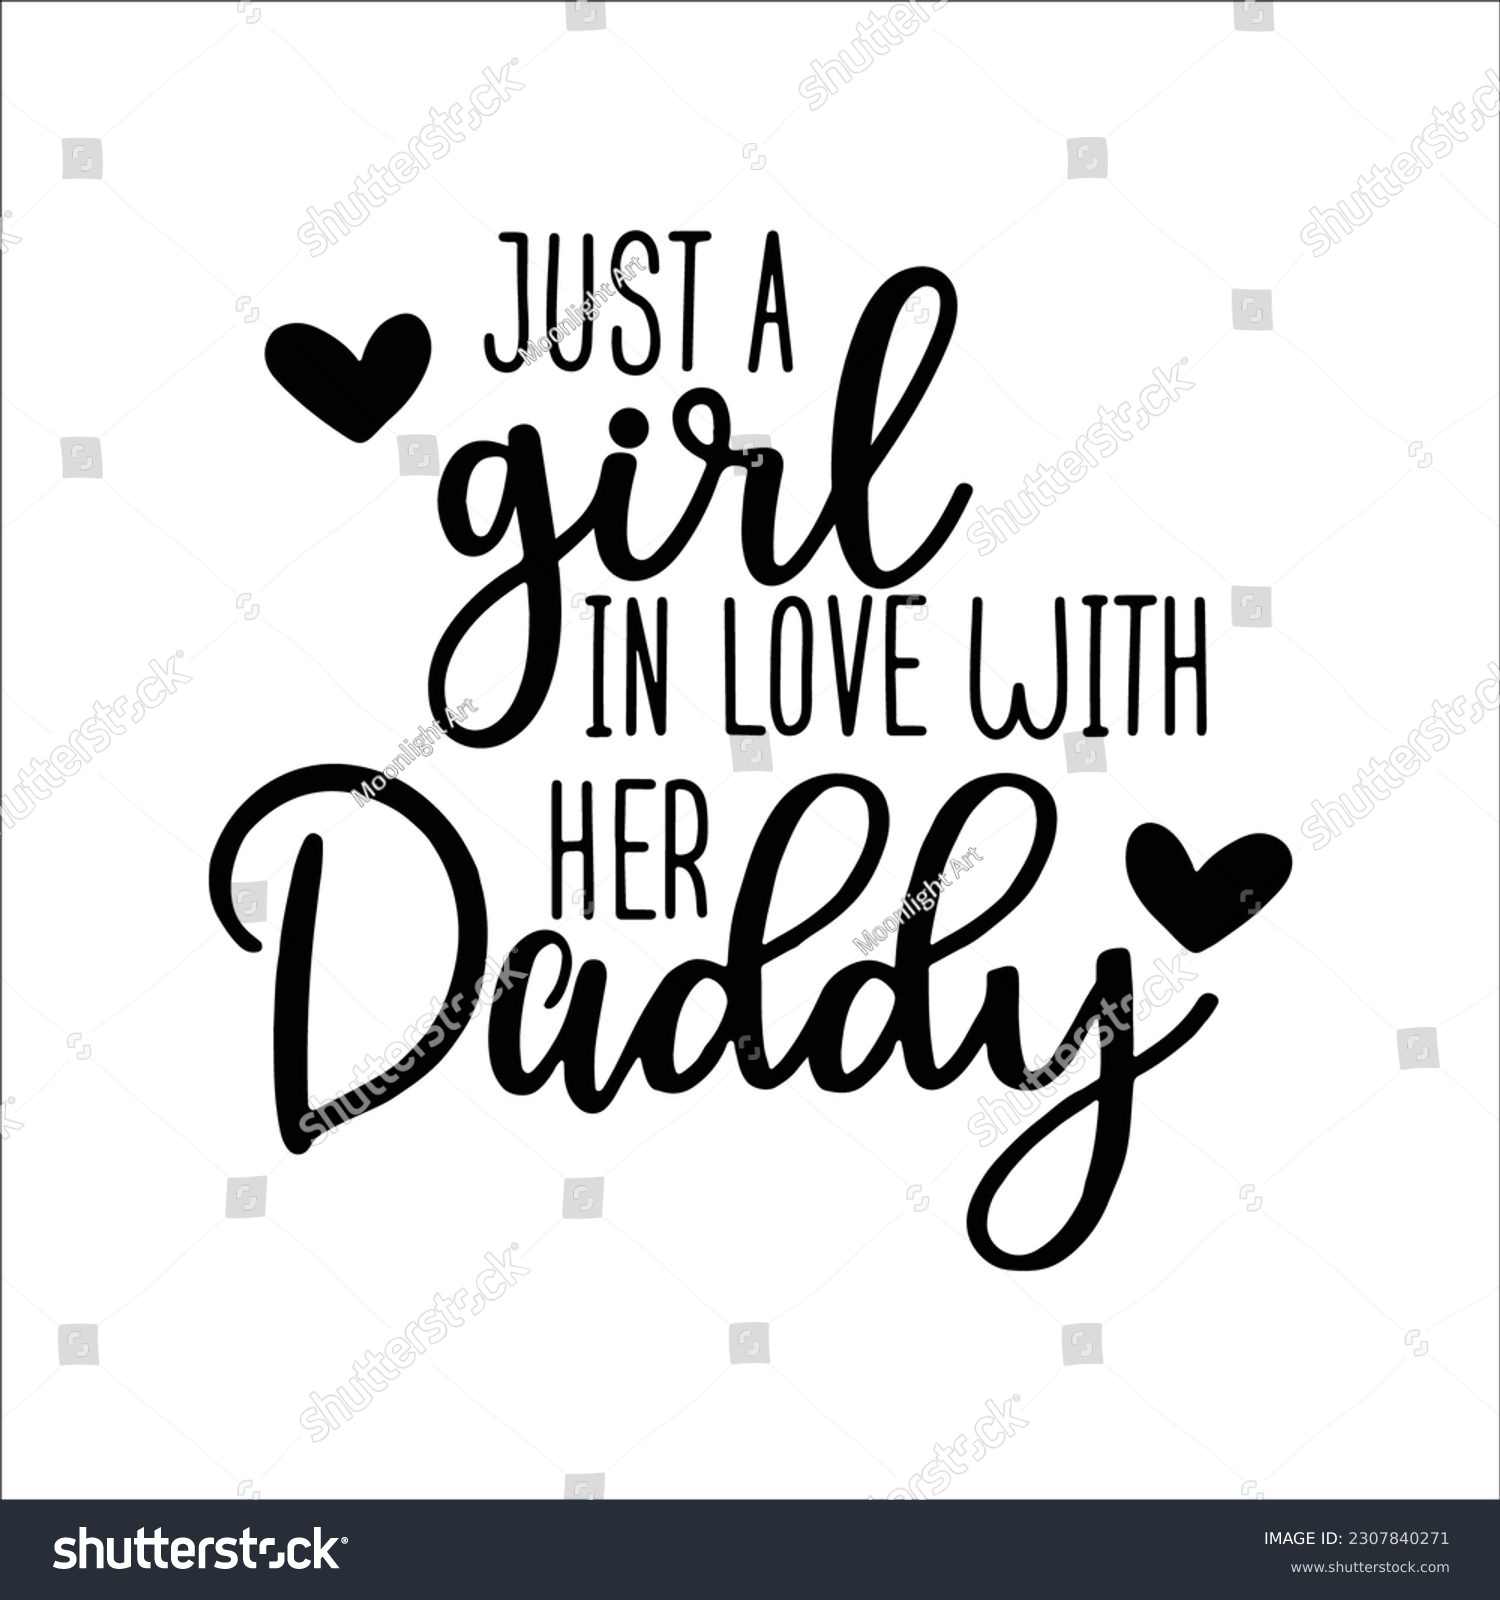 SVG of Just A Girl In Love With Her Daddy SVG Baby Toddler Girl Vector Image Cut SVG File for Cricut and Silhouette, Silhouette, Cricut SVG svg